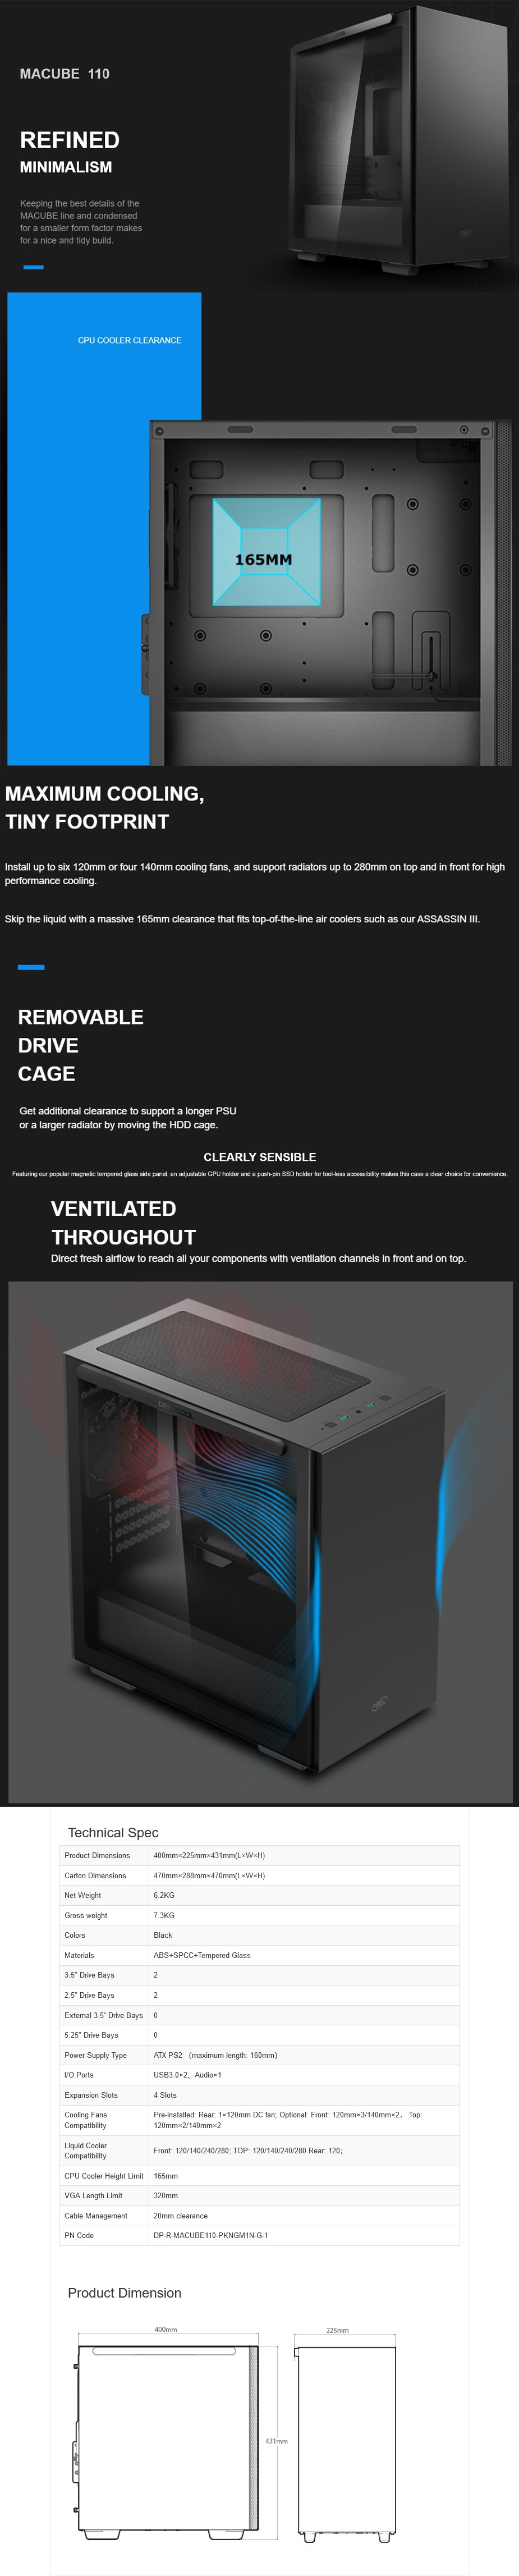 A large marketing image providing additional information about the product DeepCool Macube 110 Micro Tower Case - Pink - Additional alt info not provided